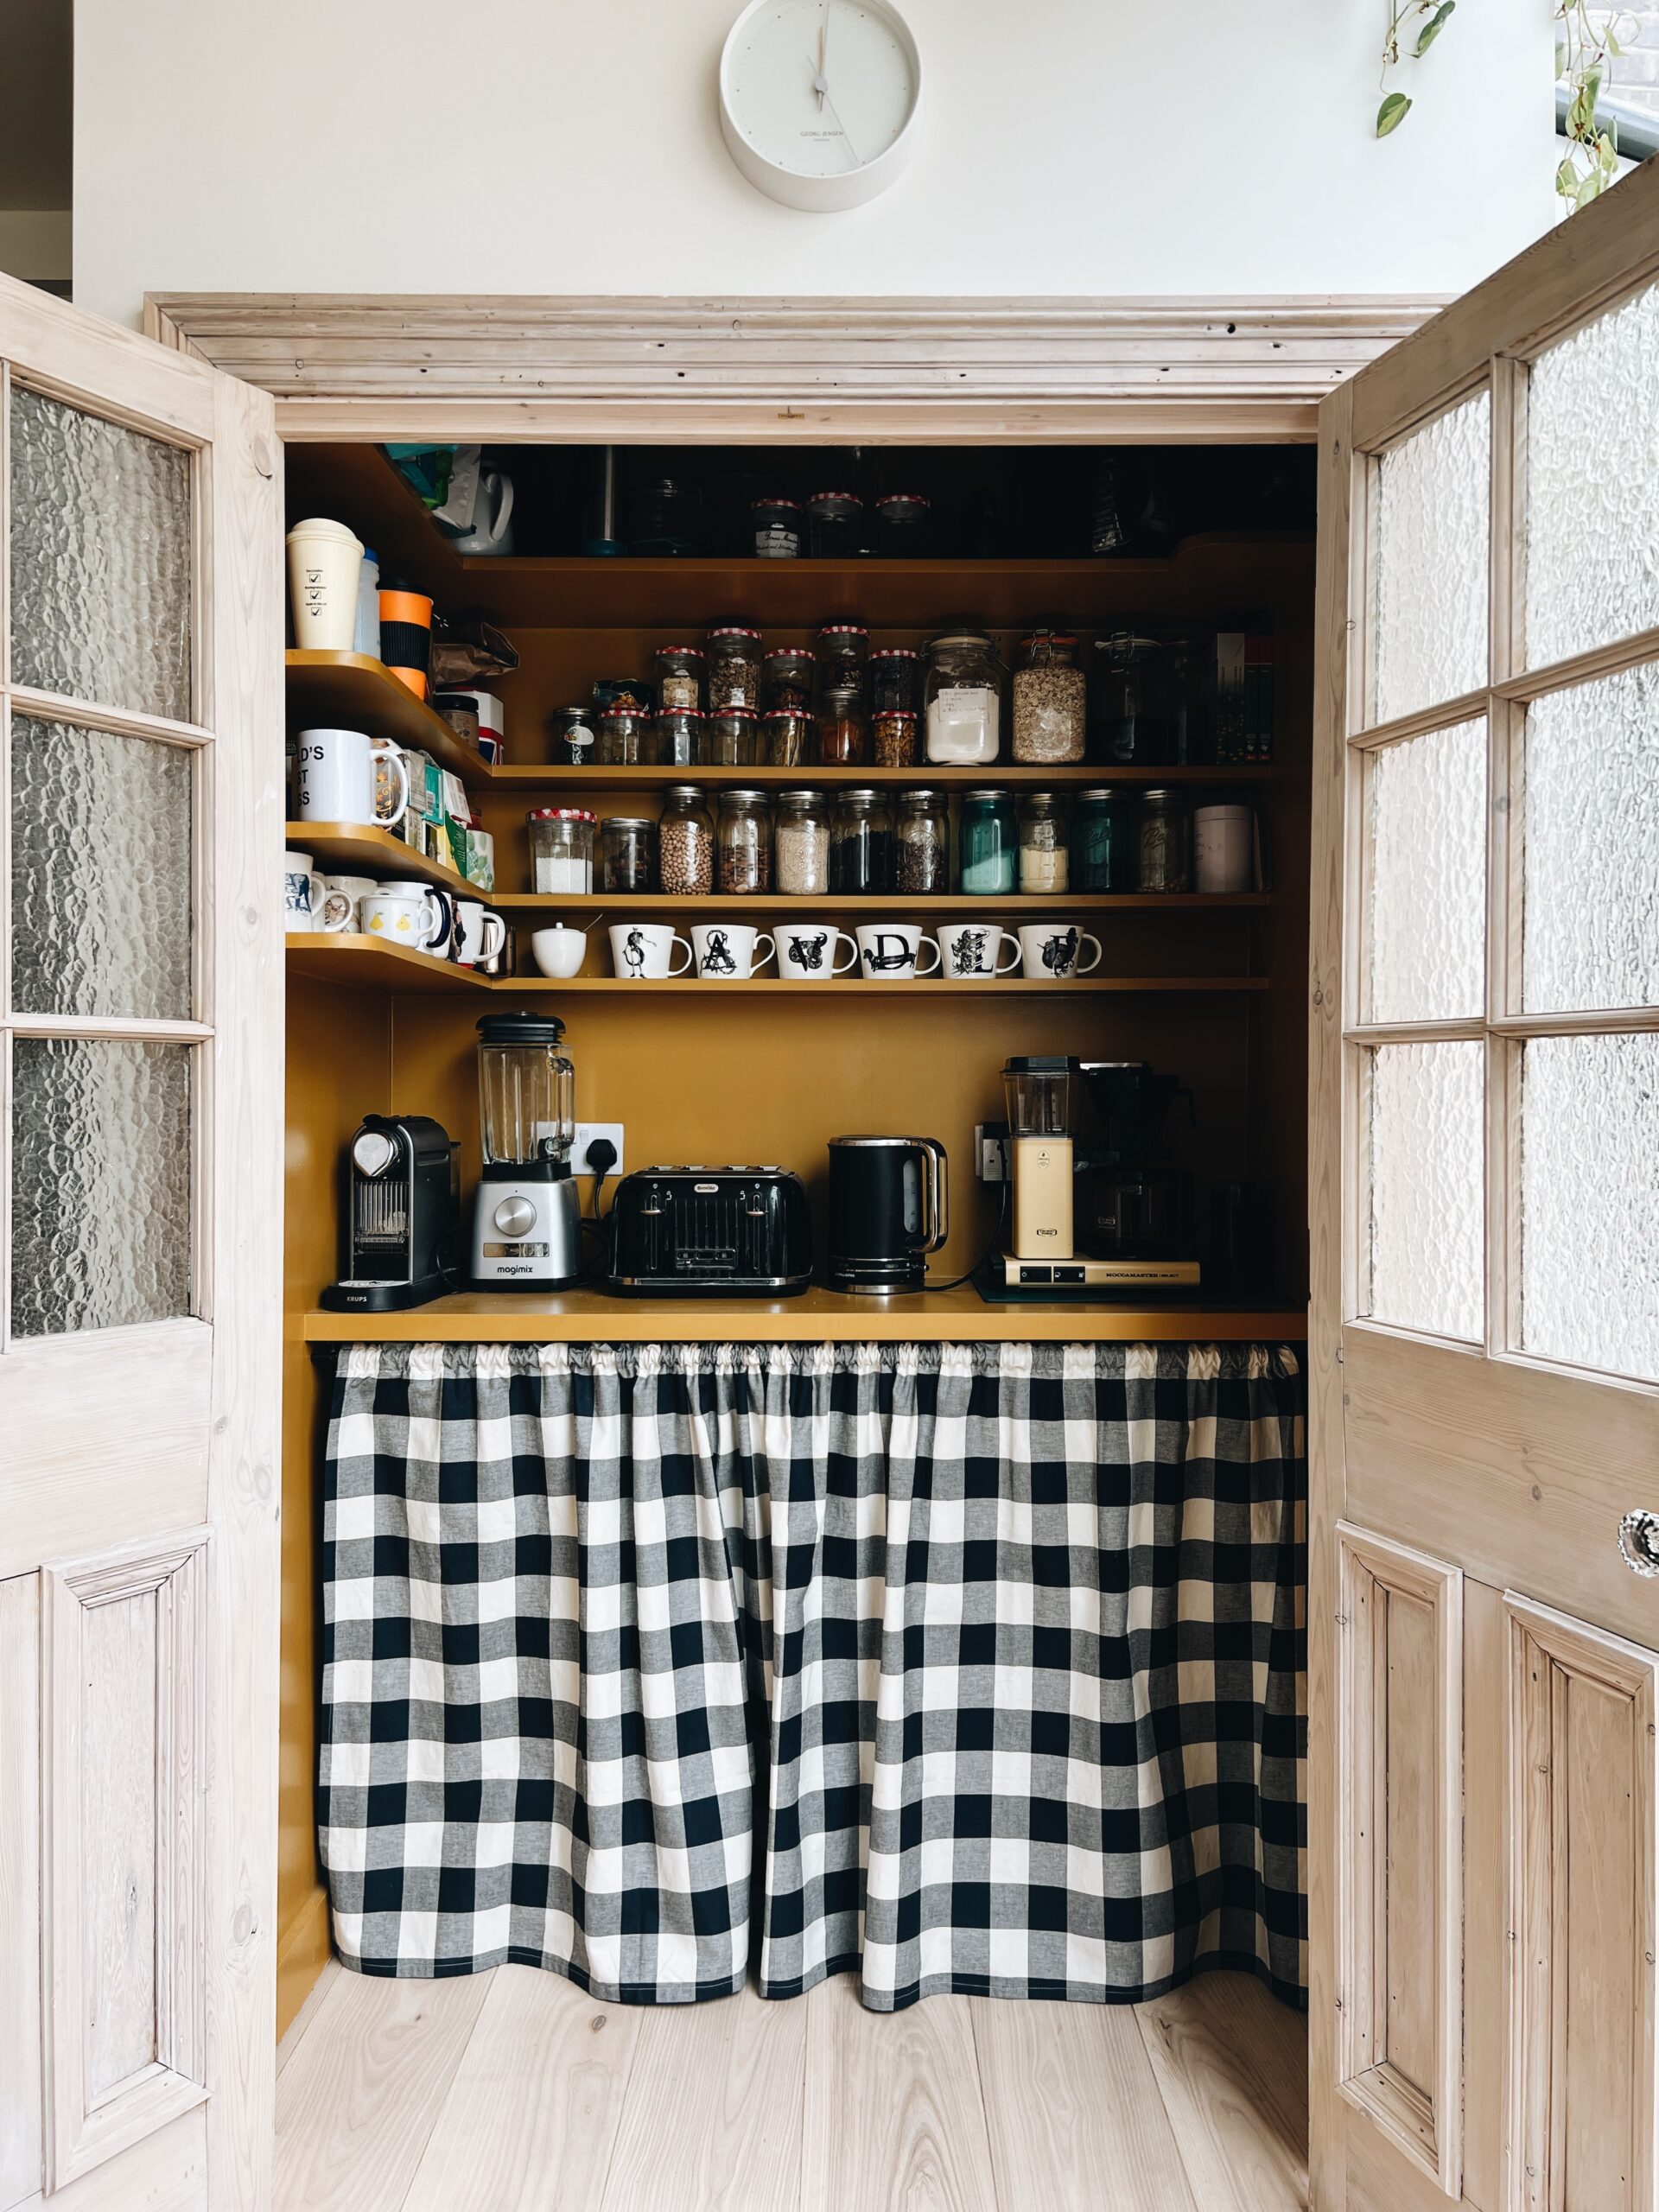 pantry in the home of @goodboneslondom image by @madaboutthehouse